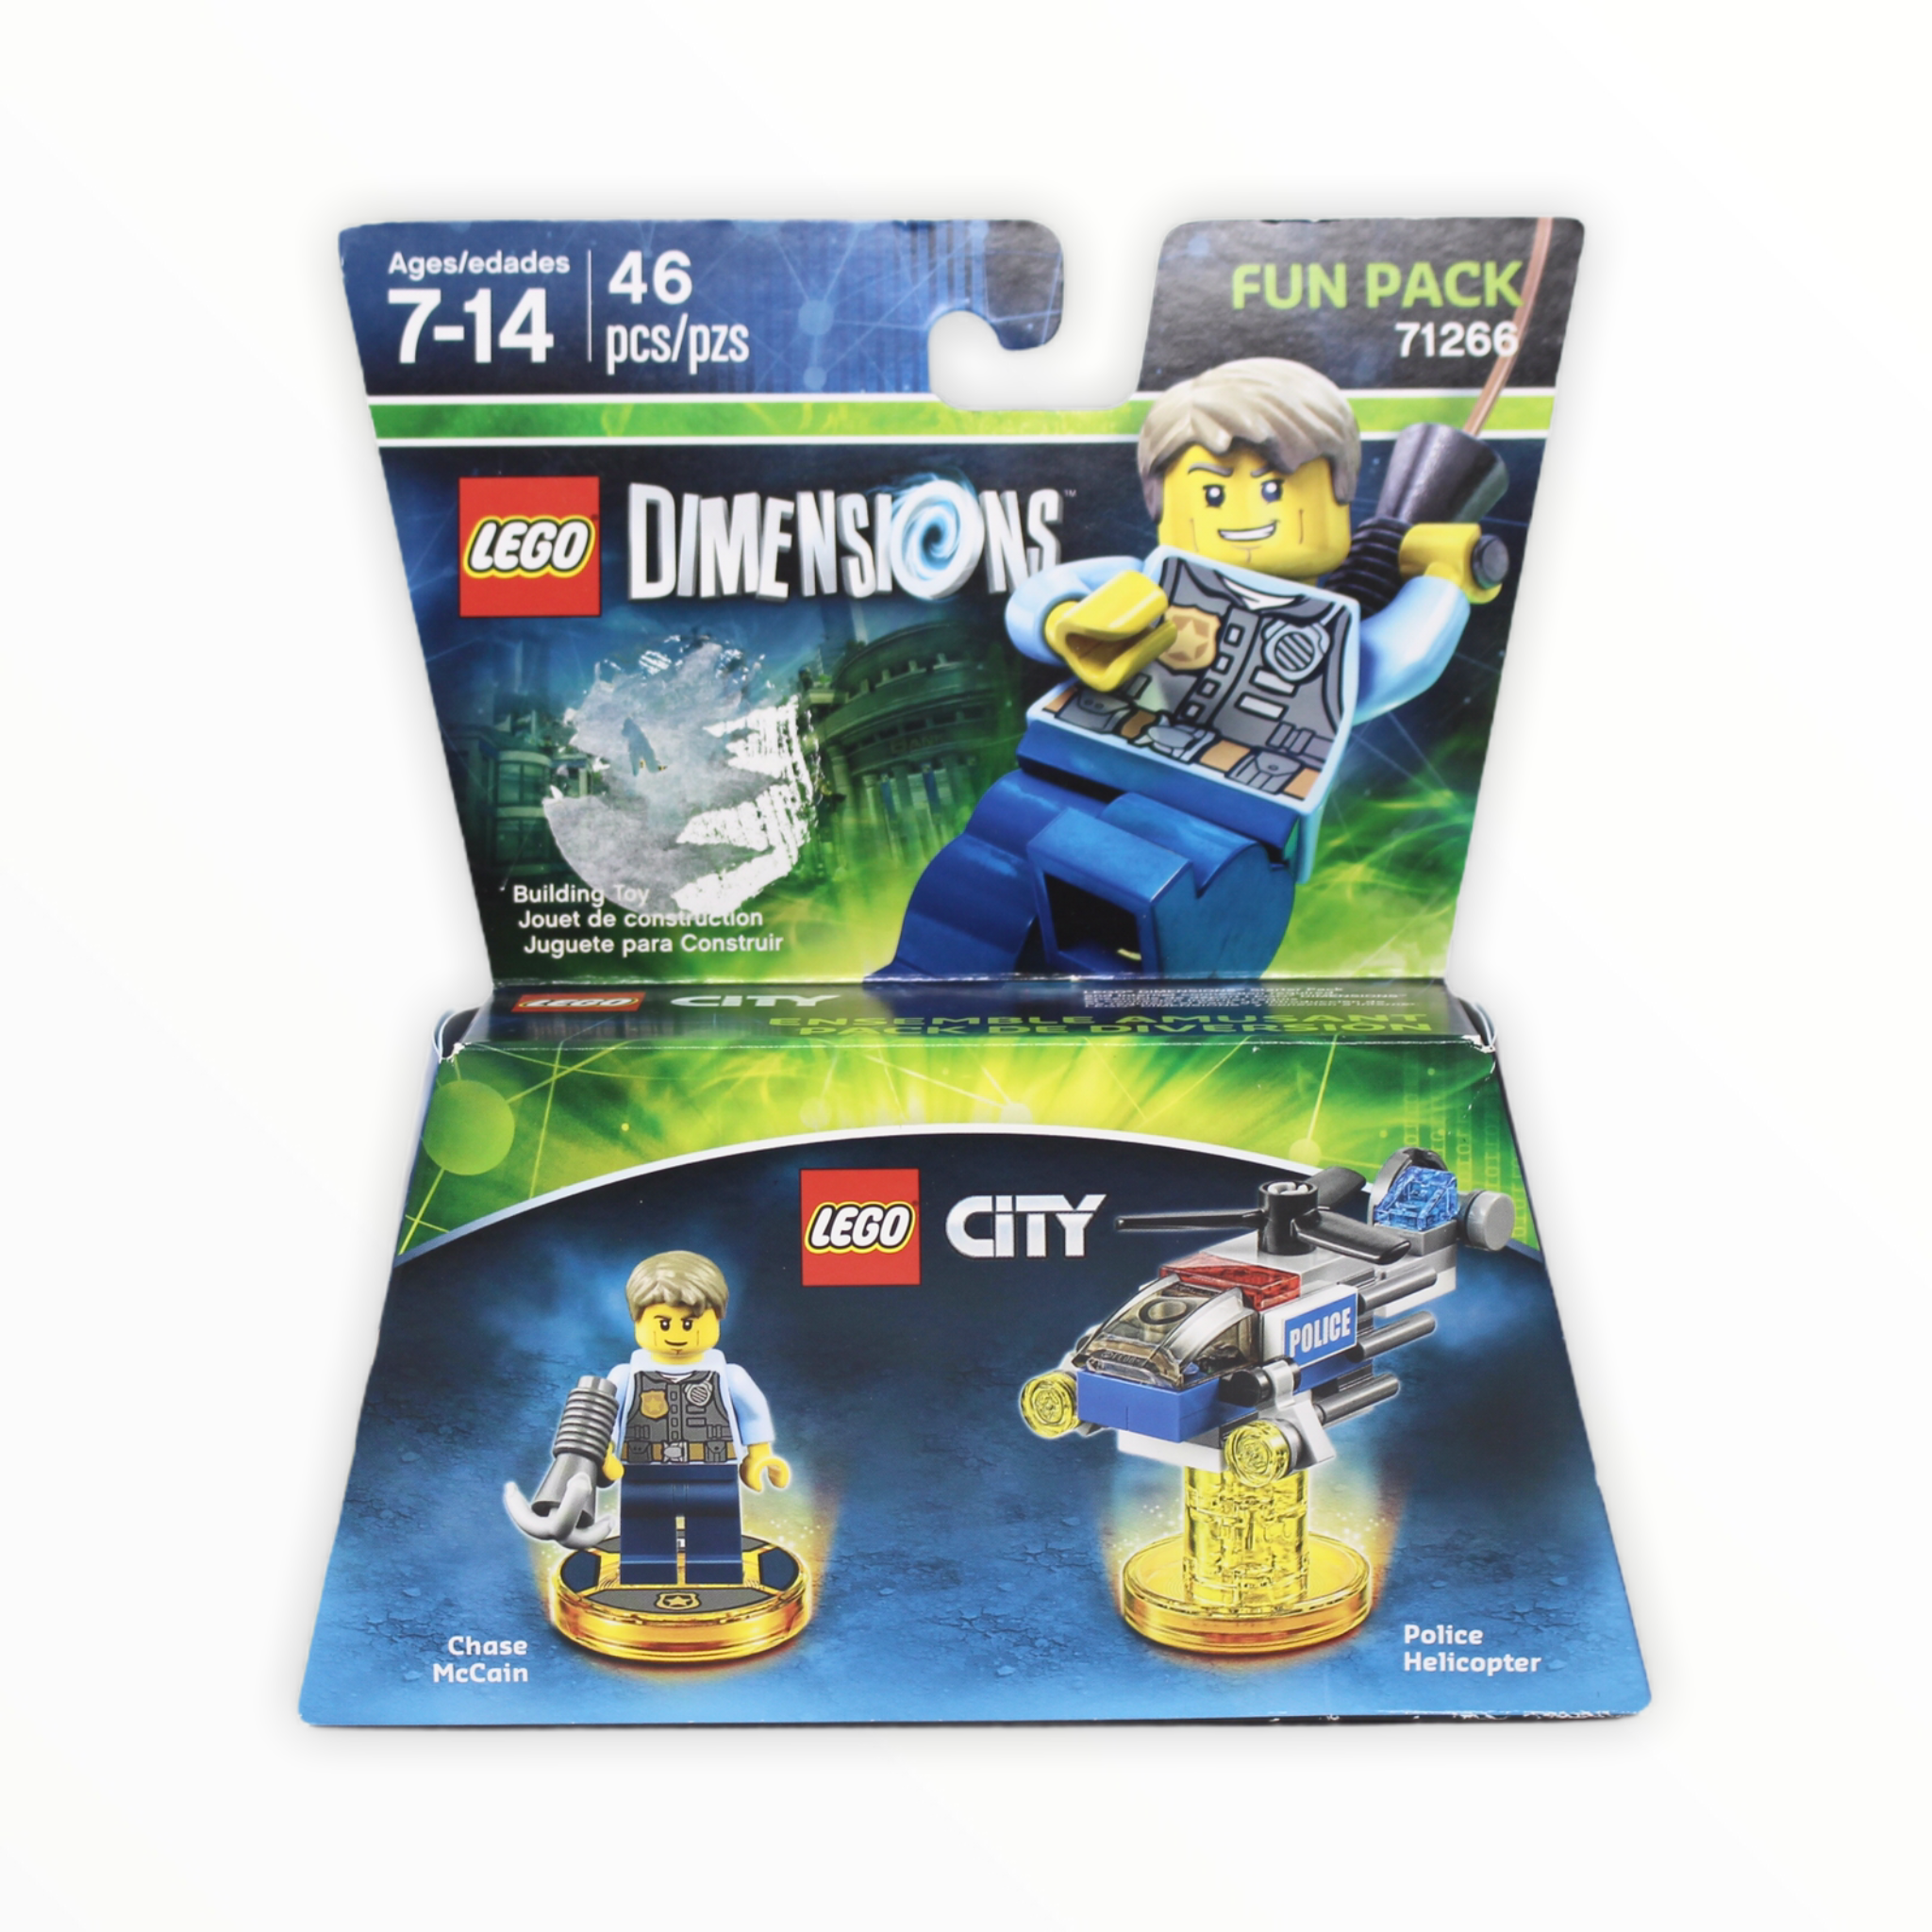 Retired Set 71266 LEGO Dimensions Fun Pack - Chase McCain and Police Helicopter